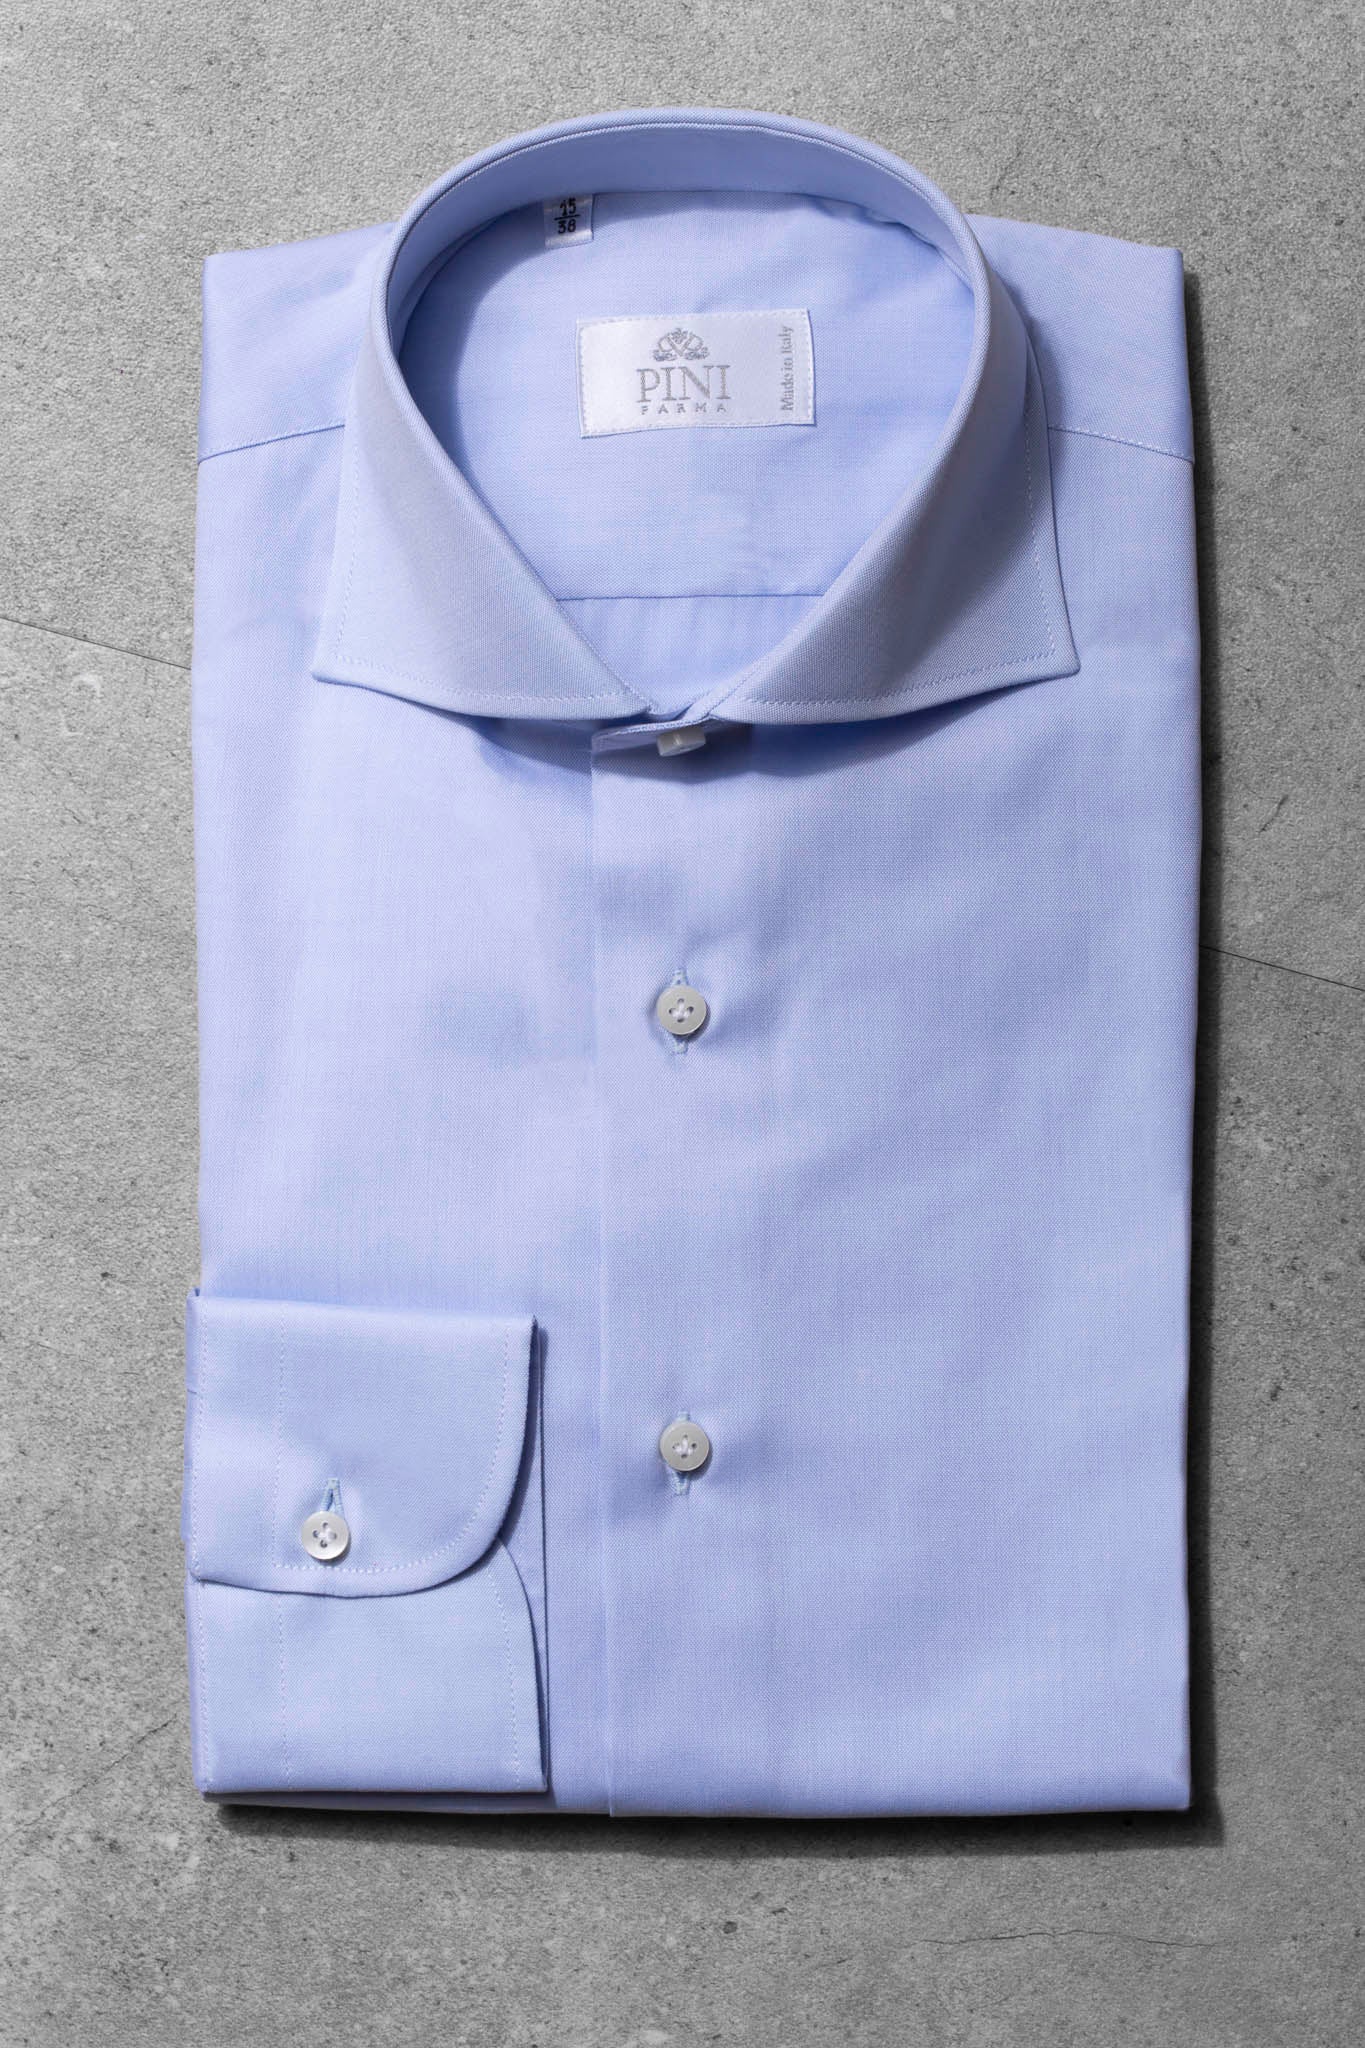 Light Blue Shirt - Made In Italy - Pini ...